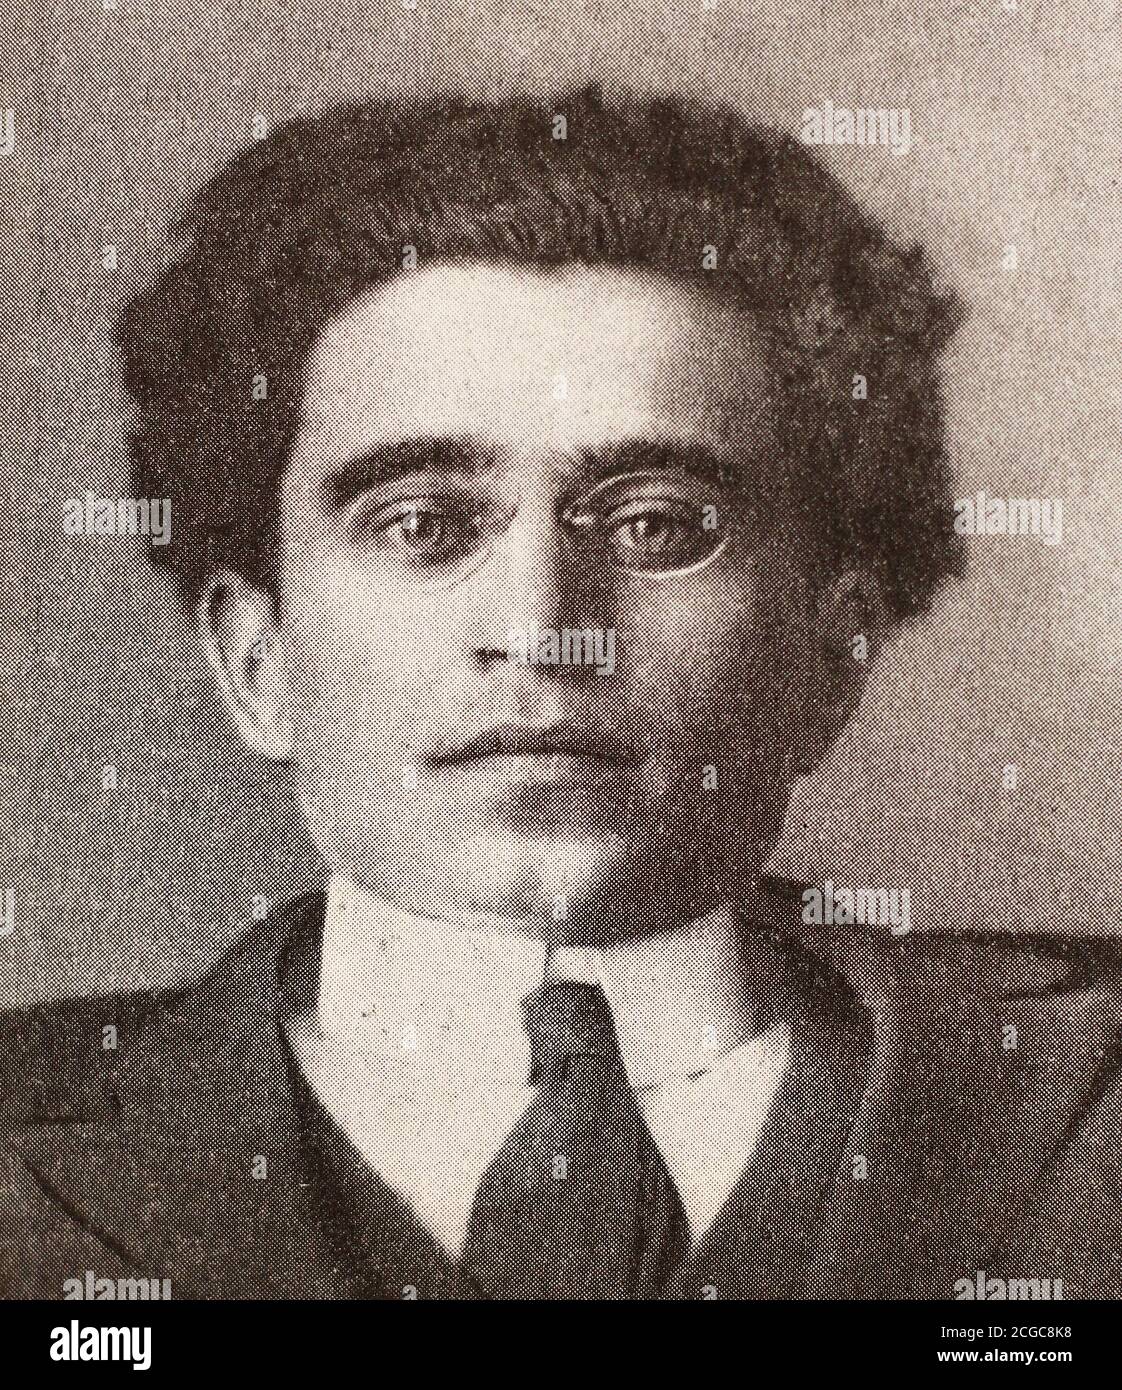 Antonio Francesco Gramsci. Photo of 1922. Antonio Francesco Gramsci (22 January 1891 – 27 April 1937) was an Italian Marxist writer and politician. He wrote on philosophy, political theory, sociology, history and linguistics. He was a founding member and one-time leader of the Communist Party of Italy and was imprisoned by Benito Mussolini's Fascist regime. Gramsci wrote more than 30 notebooks and 3,000 pages of history and analysis during his imprisonment. Stock Photo